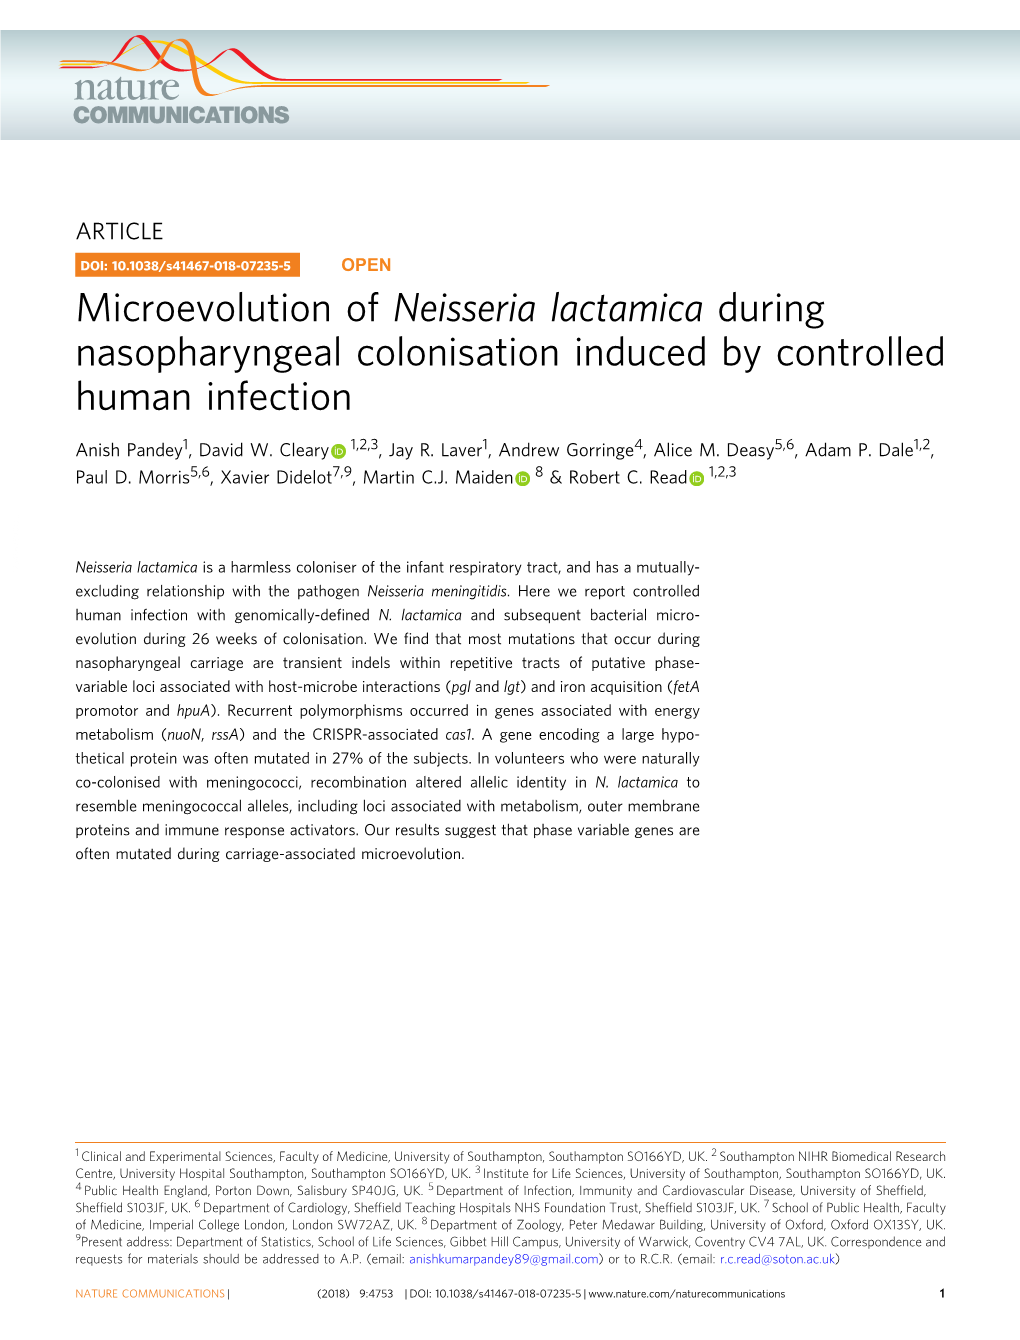 Microevolution of Neisseria Lactamica During Nasopharyngeal Colonisation Induced by Controlled Human Infection